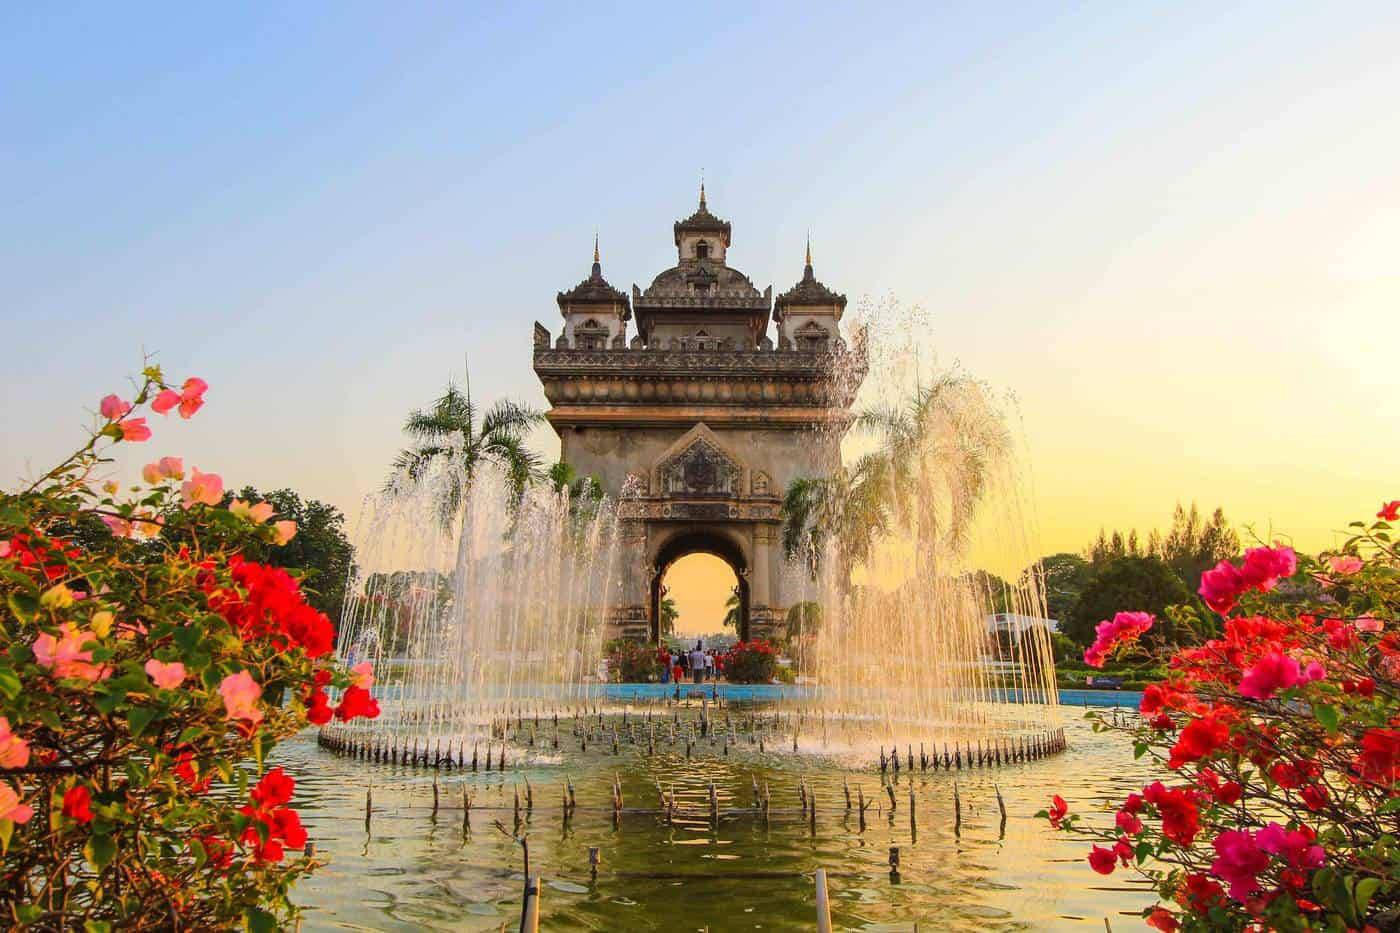 VISIT VIENTIANE – THE LITTLE FRANCE OF ASIA